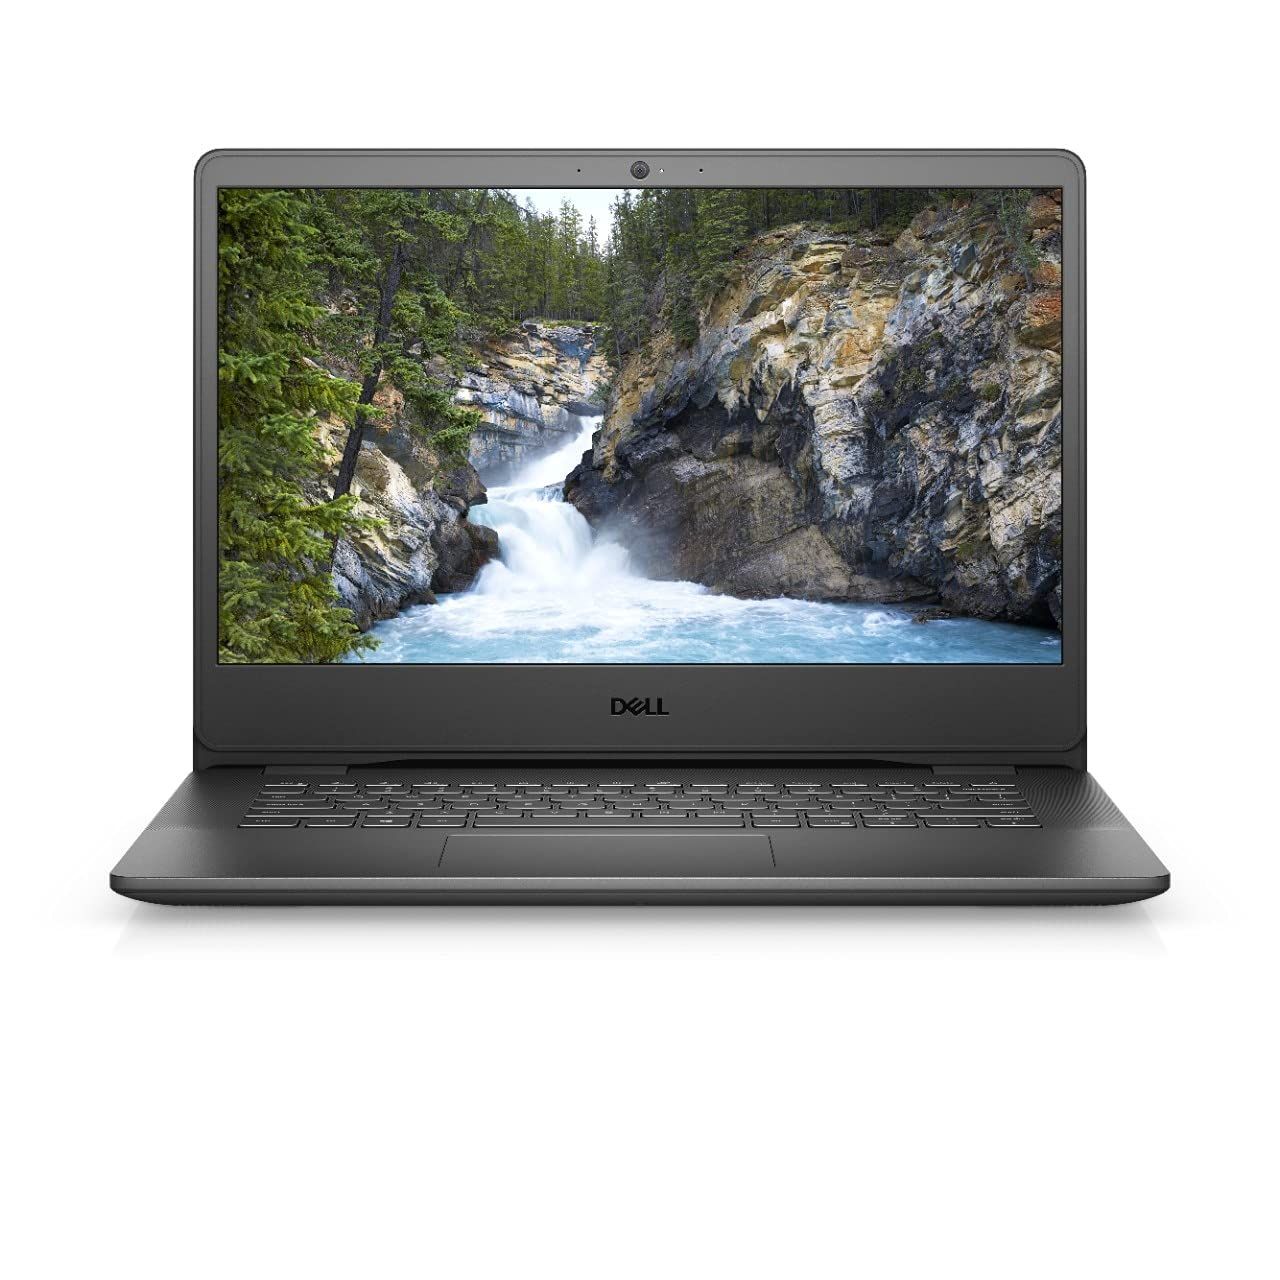 Laptop Dell Vostro 3530, 15.6 inch FHD (1920 x 1080) 120Hz 250 nits WVA Anti- Glare LED Backlit Narrow Border Display, Carbon Black Palmrest without Finger Print Reader, Carbon Black, 13th Generation Intel Core i5-1335U (12 MB cache, 10 cores, 12 threads, up to 4.60 GHz), Intel(R) UHD Graphics with_2